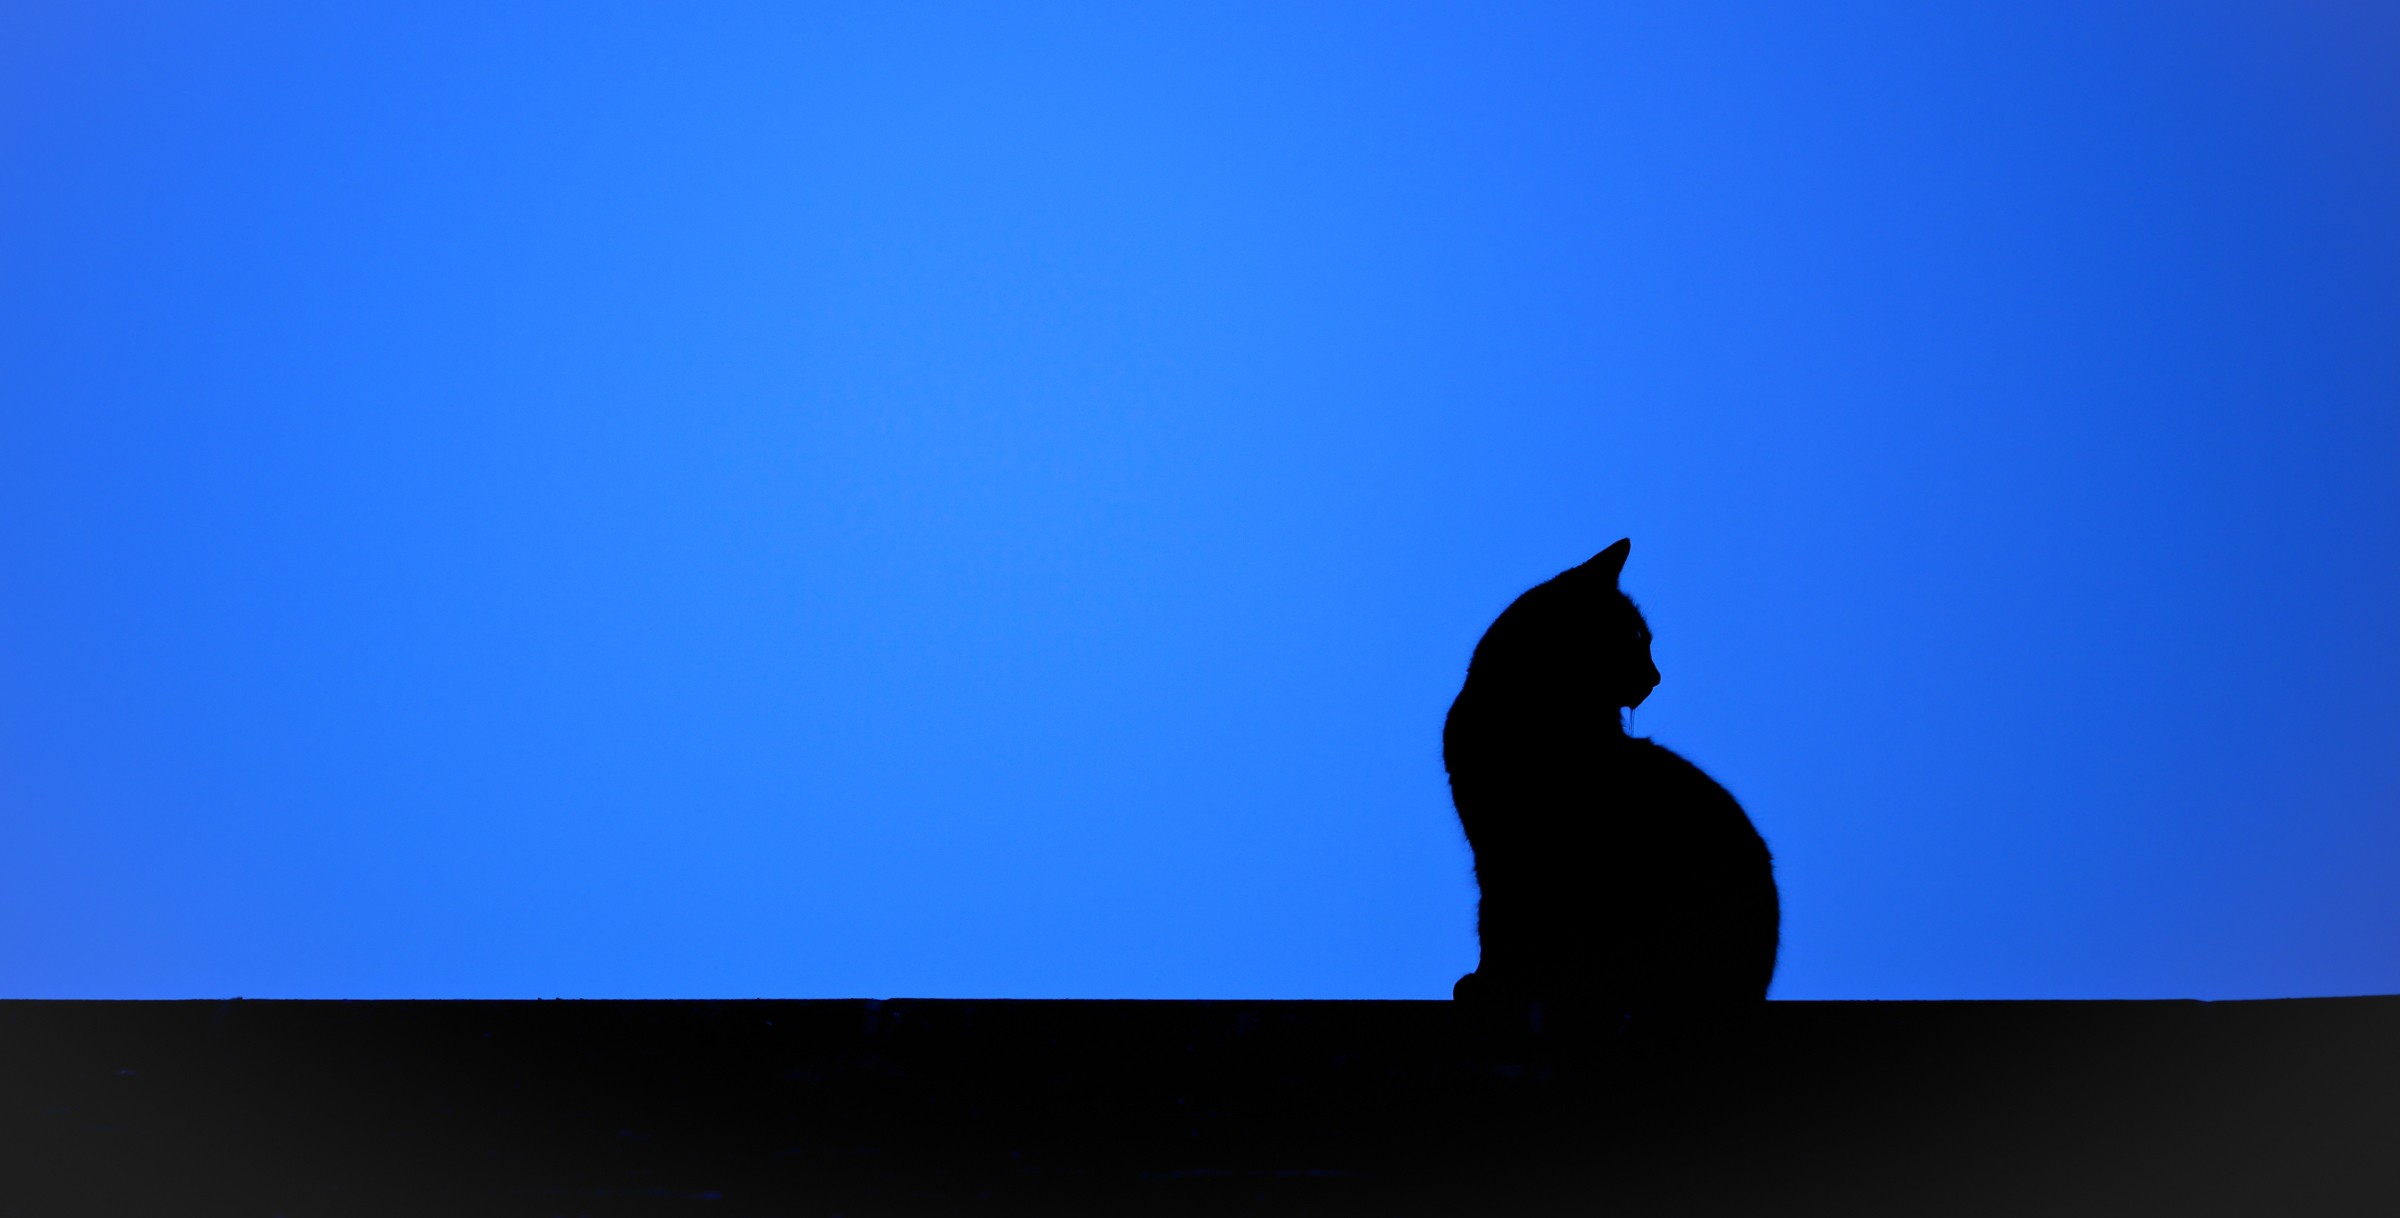 General 2400x1218 cats animals silhouette mammals blue minimalism simple background